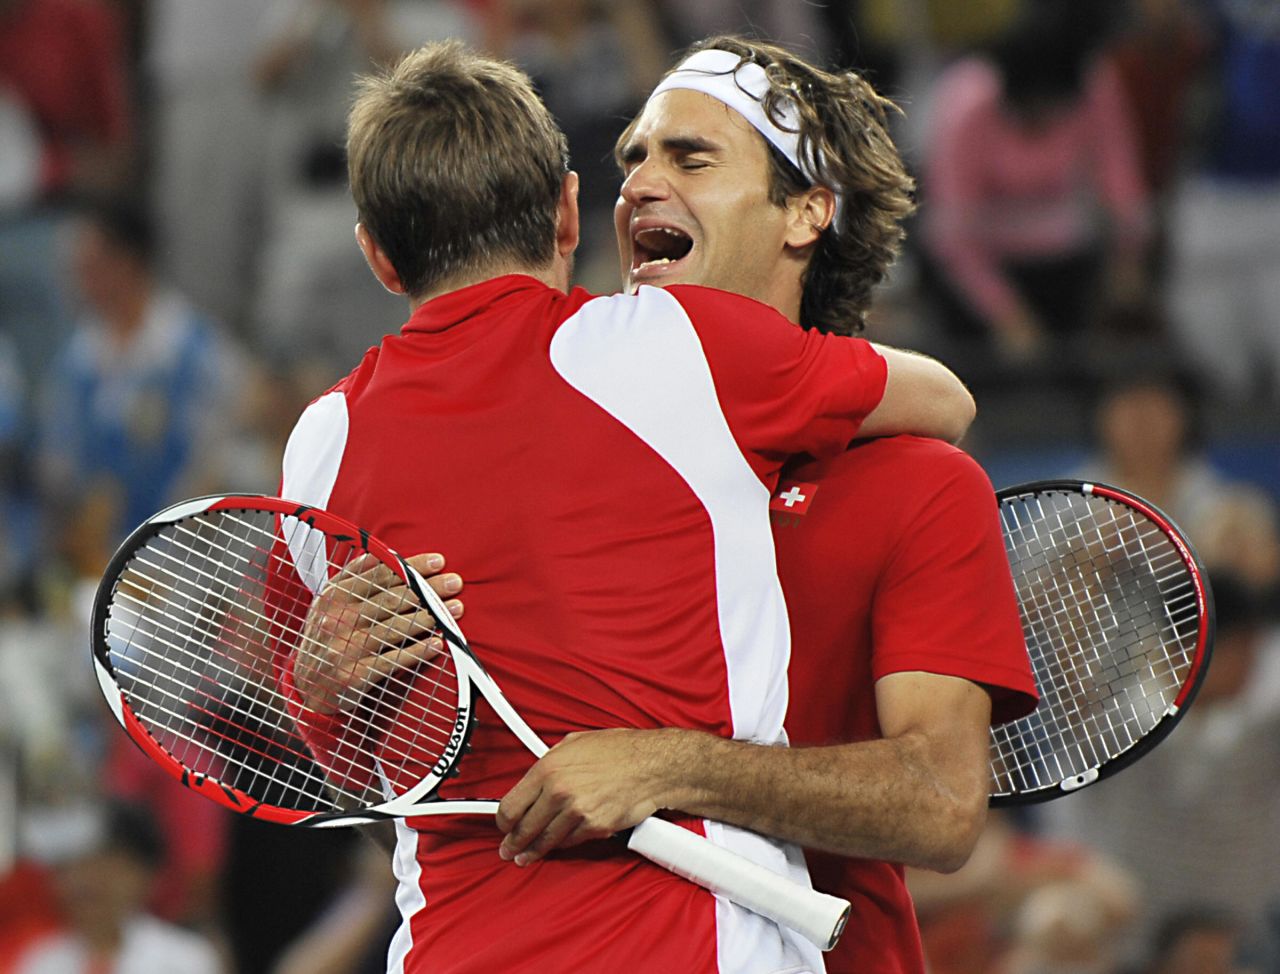 Federer breaks down as the significance of their achievement gets the better of him.